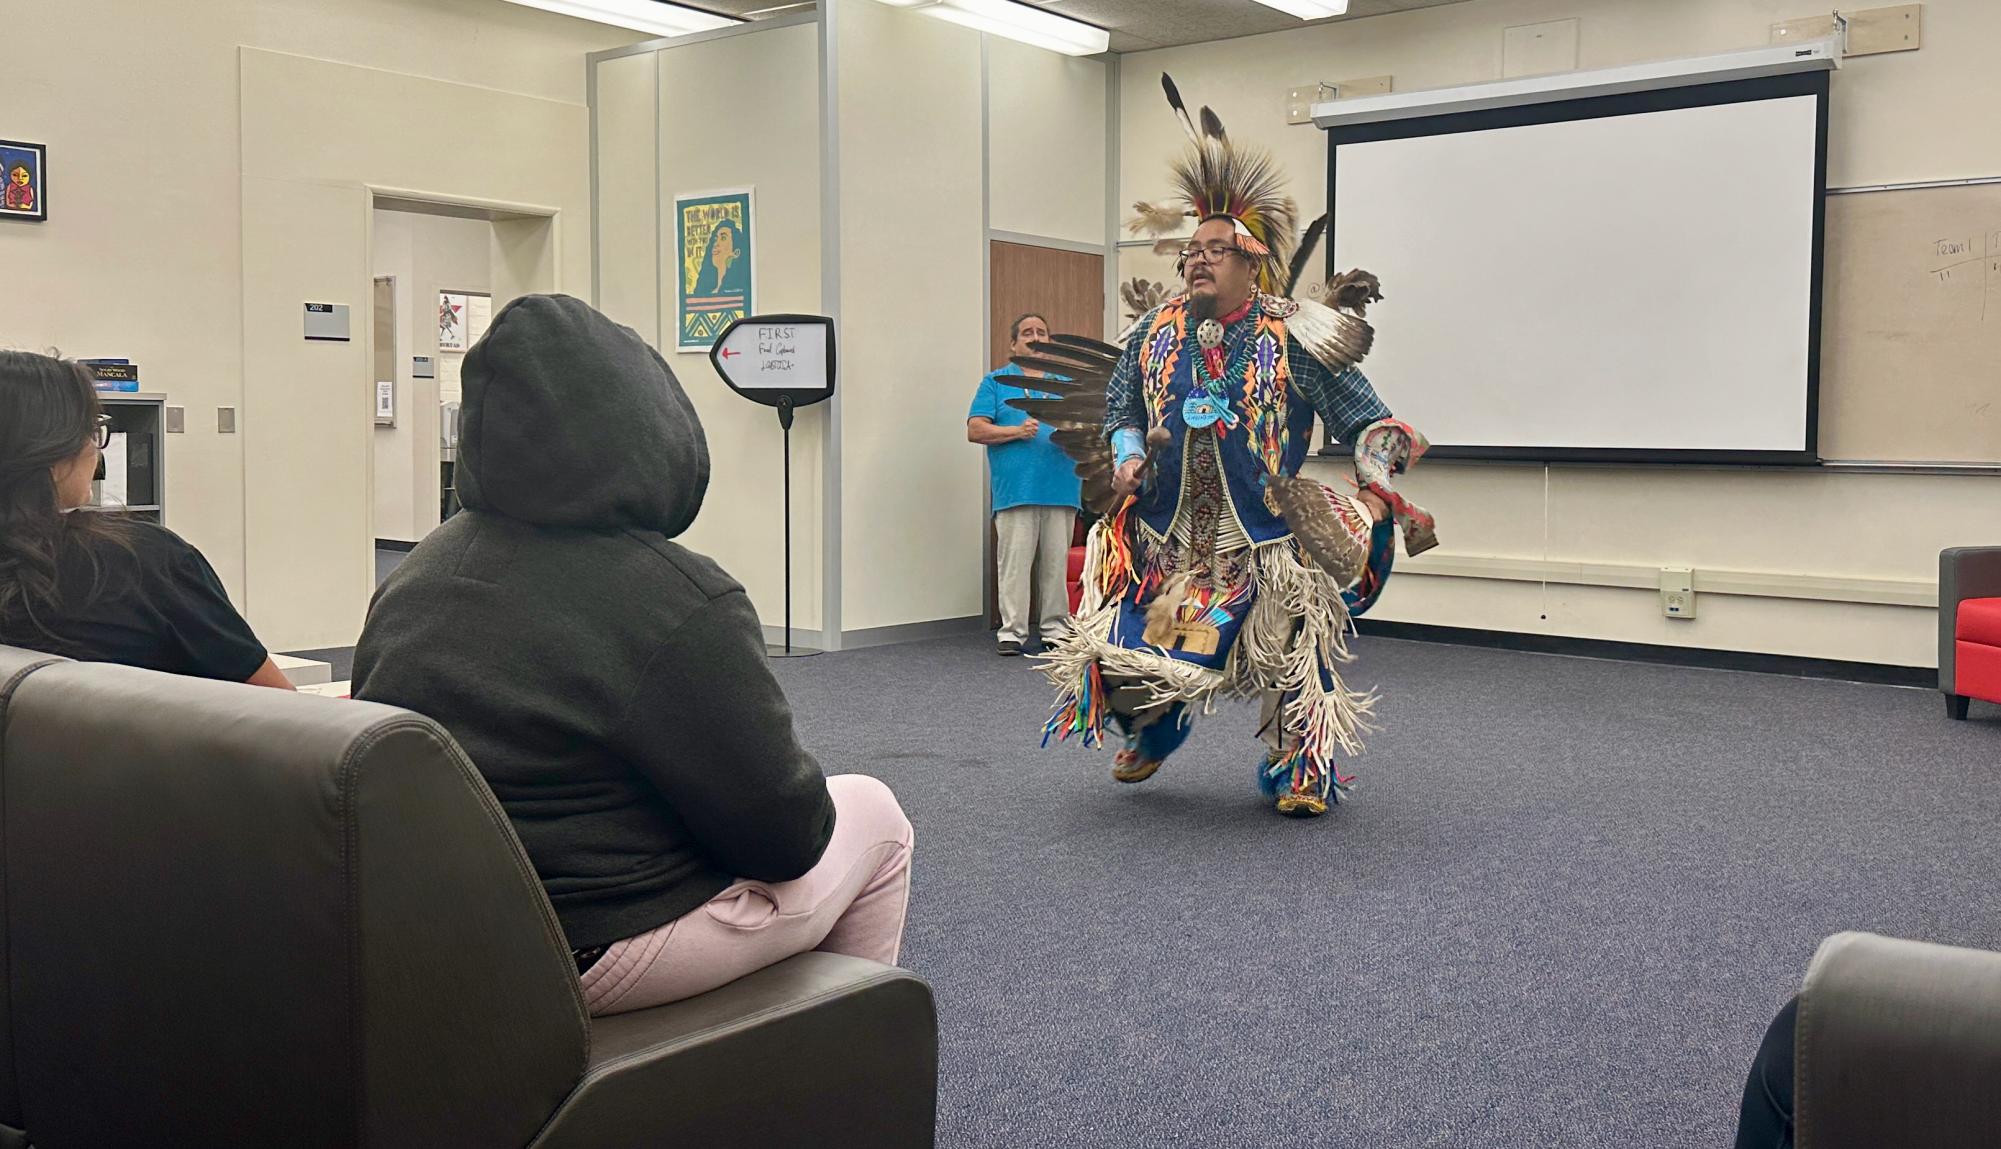 Tso Yanez dances during a drum circle at the Social Justice Center on Wednesday, Nov 15. (Nick Geltz | The Union)